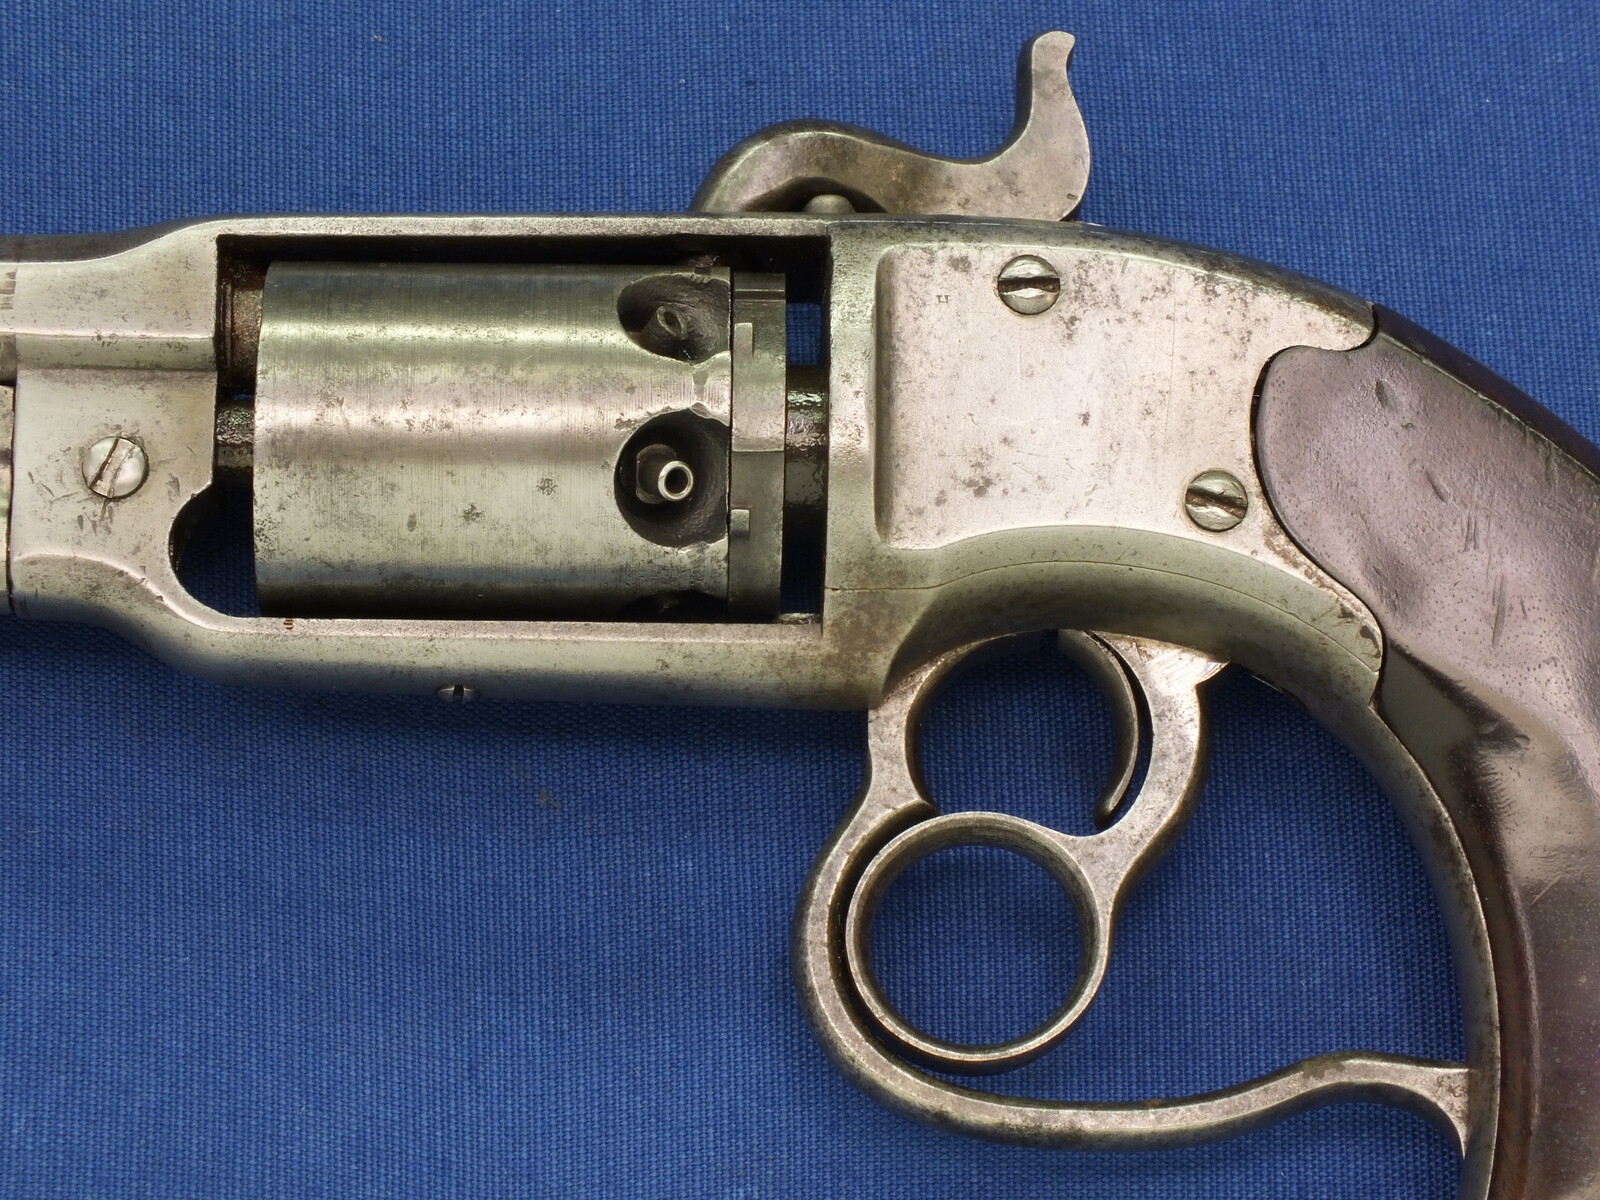 A very nice antique American Civil War Savage Rivolving Fire-Arms Co Navy Model Percussion Revolver, .36 caliber, 6 shot, 7 1/8 inch barrel, length 38 cm, in very good condition. Price 2.175 euro.